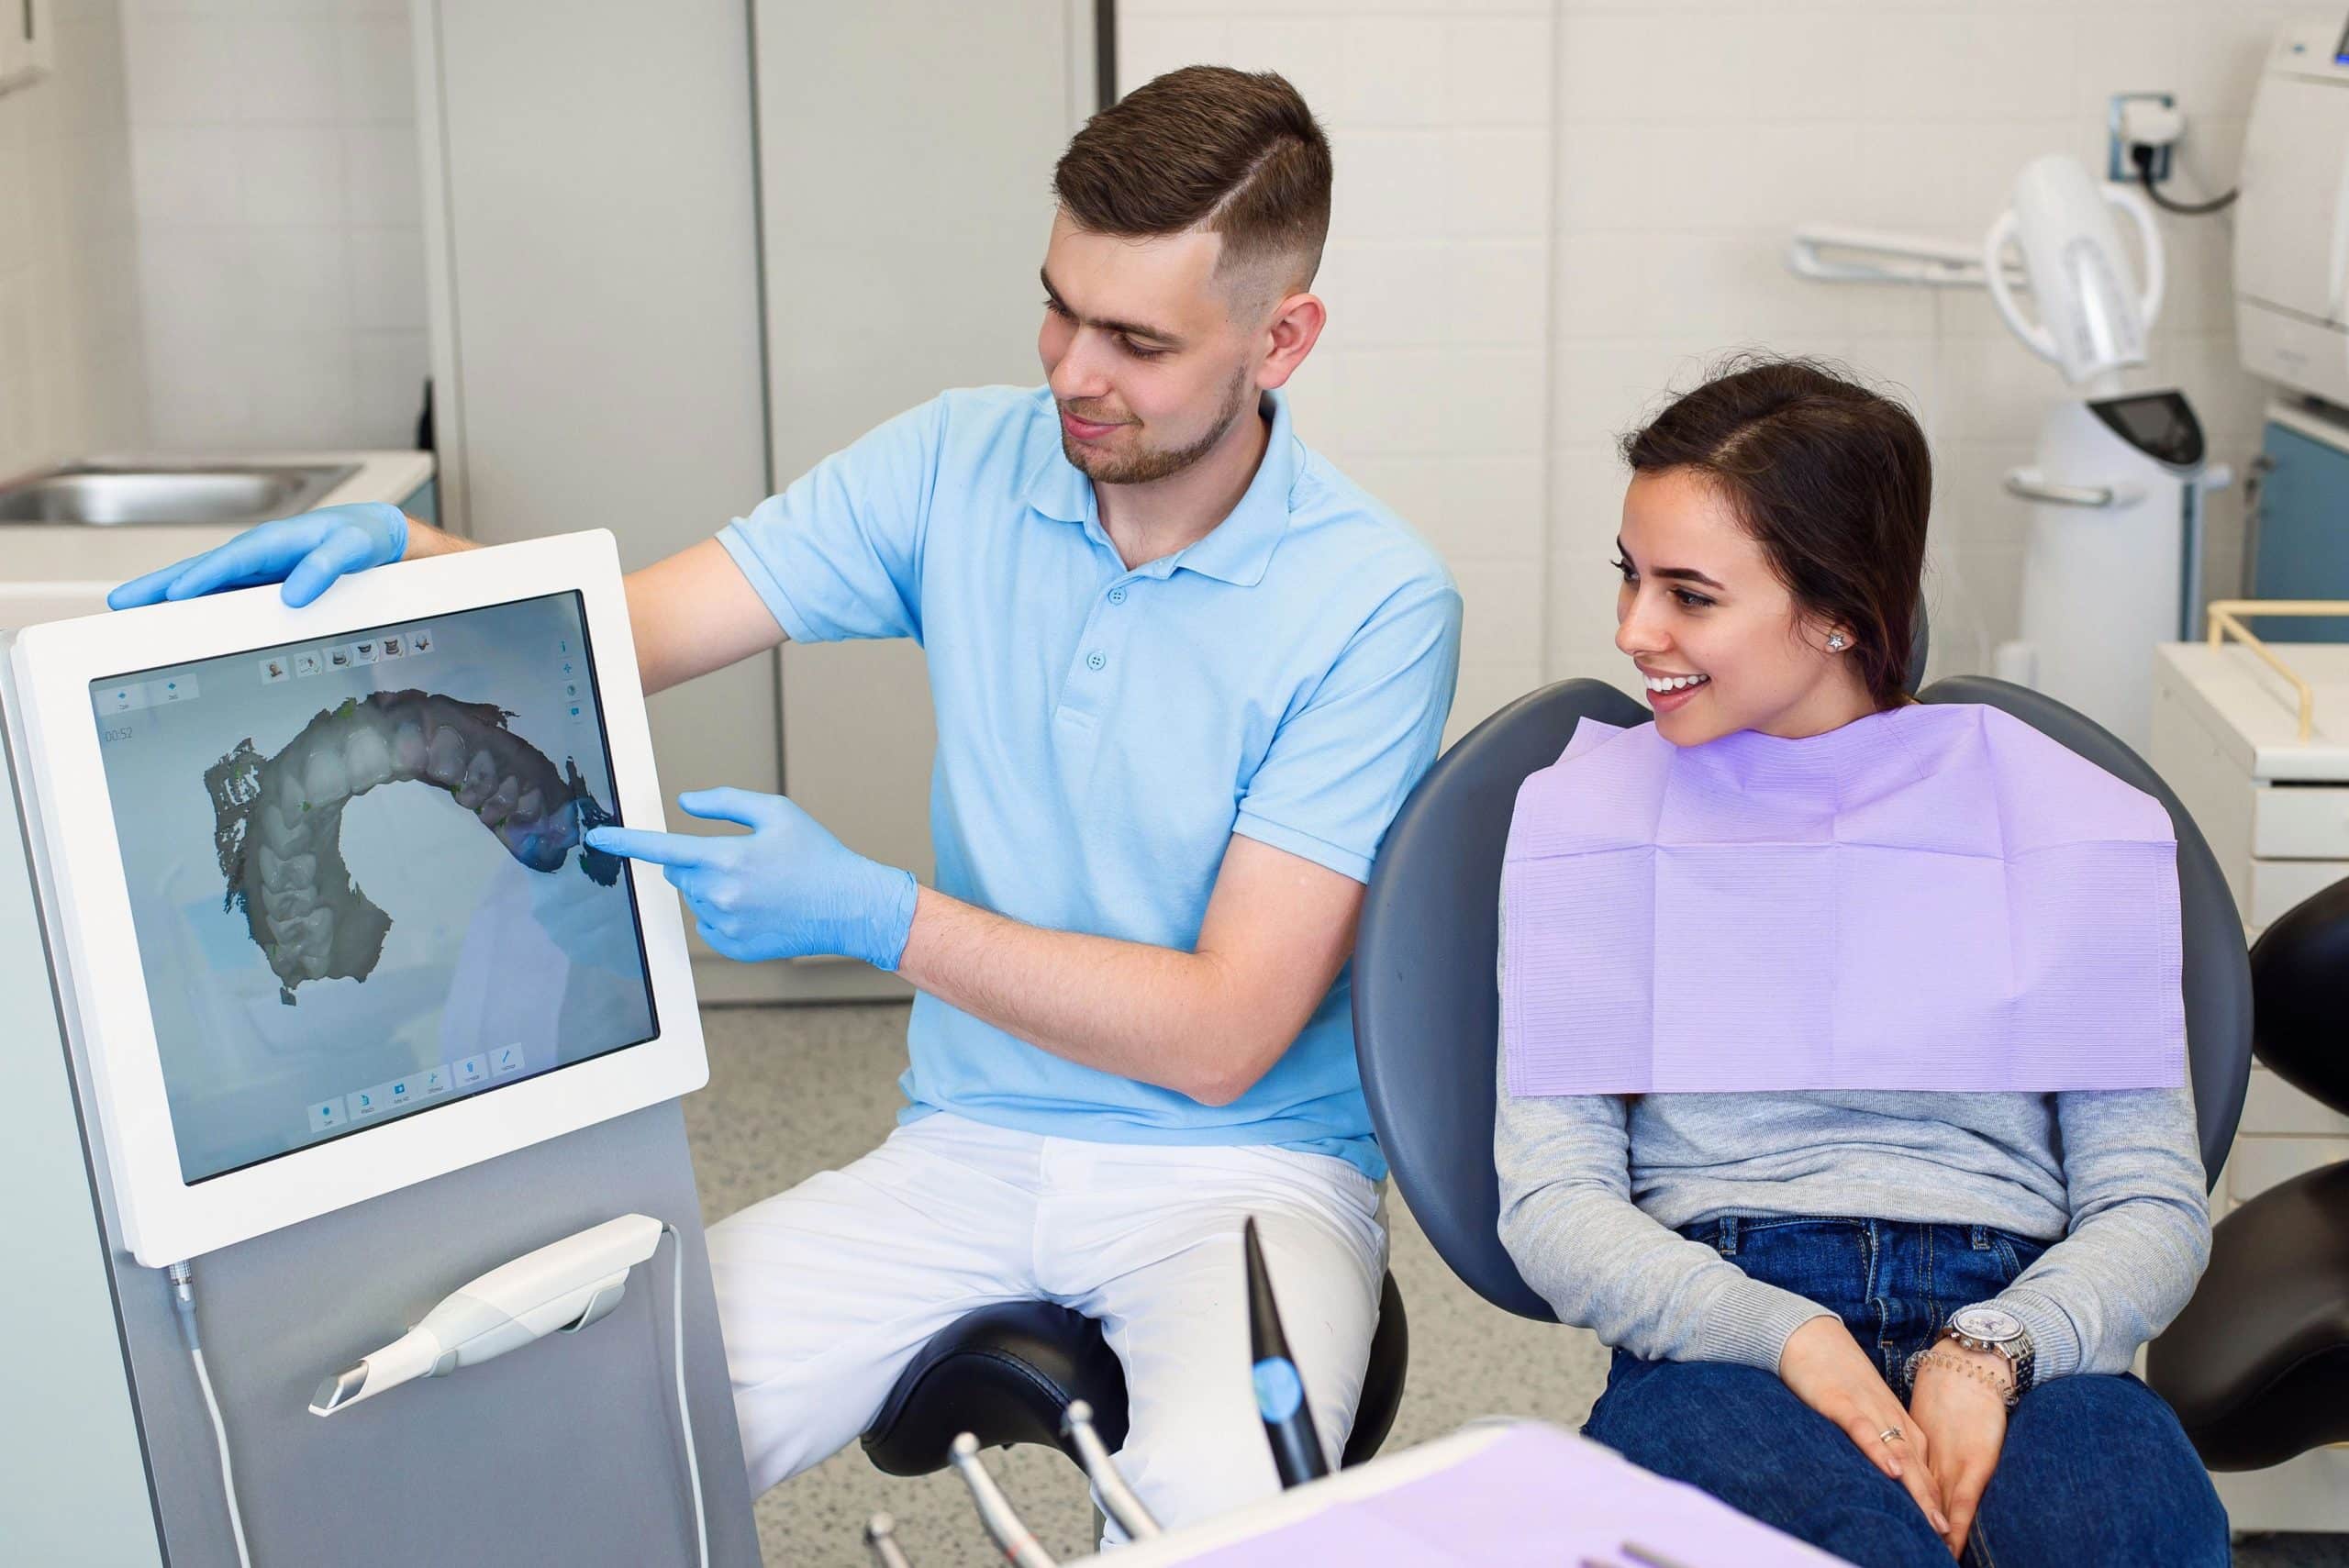 Dentistry News Roundup August 2022  New Itero scanner